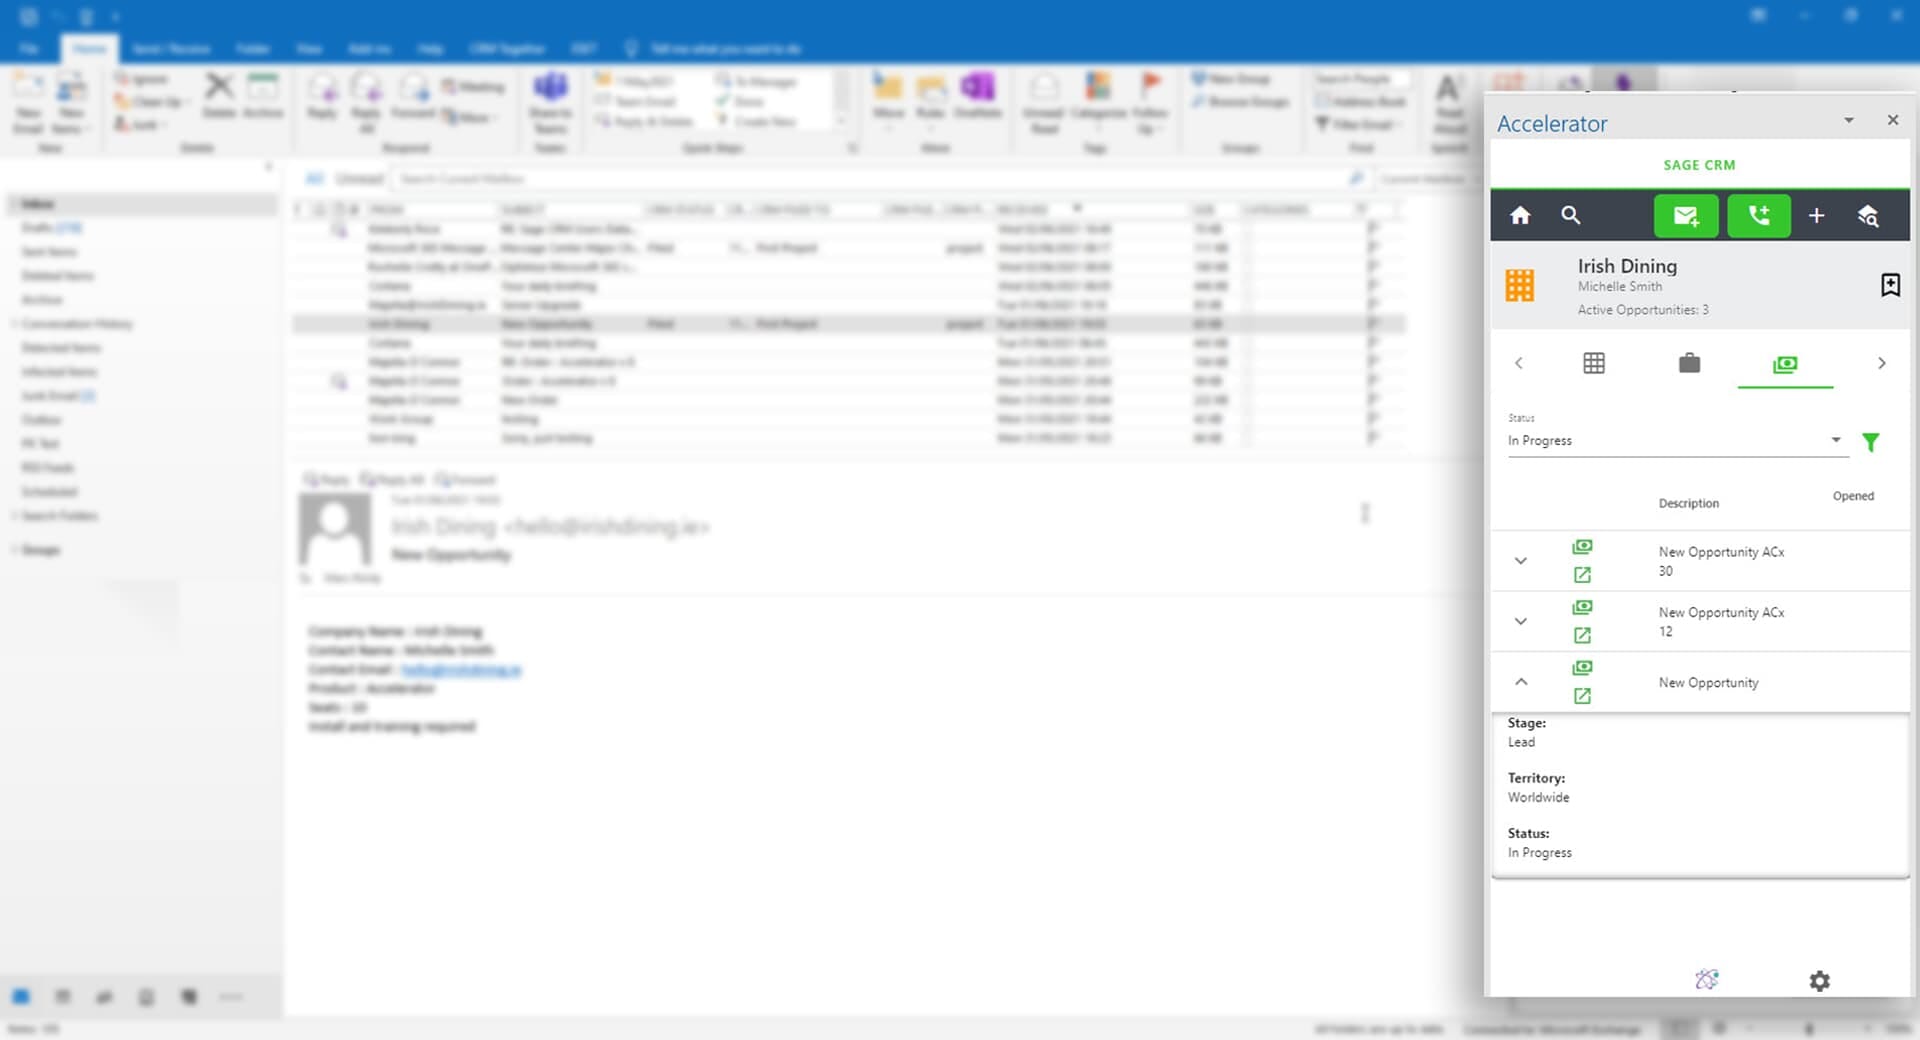 Update CRM from Outlook